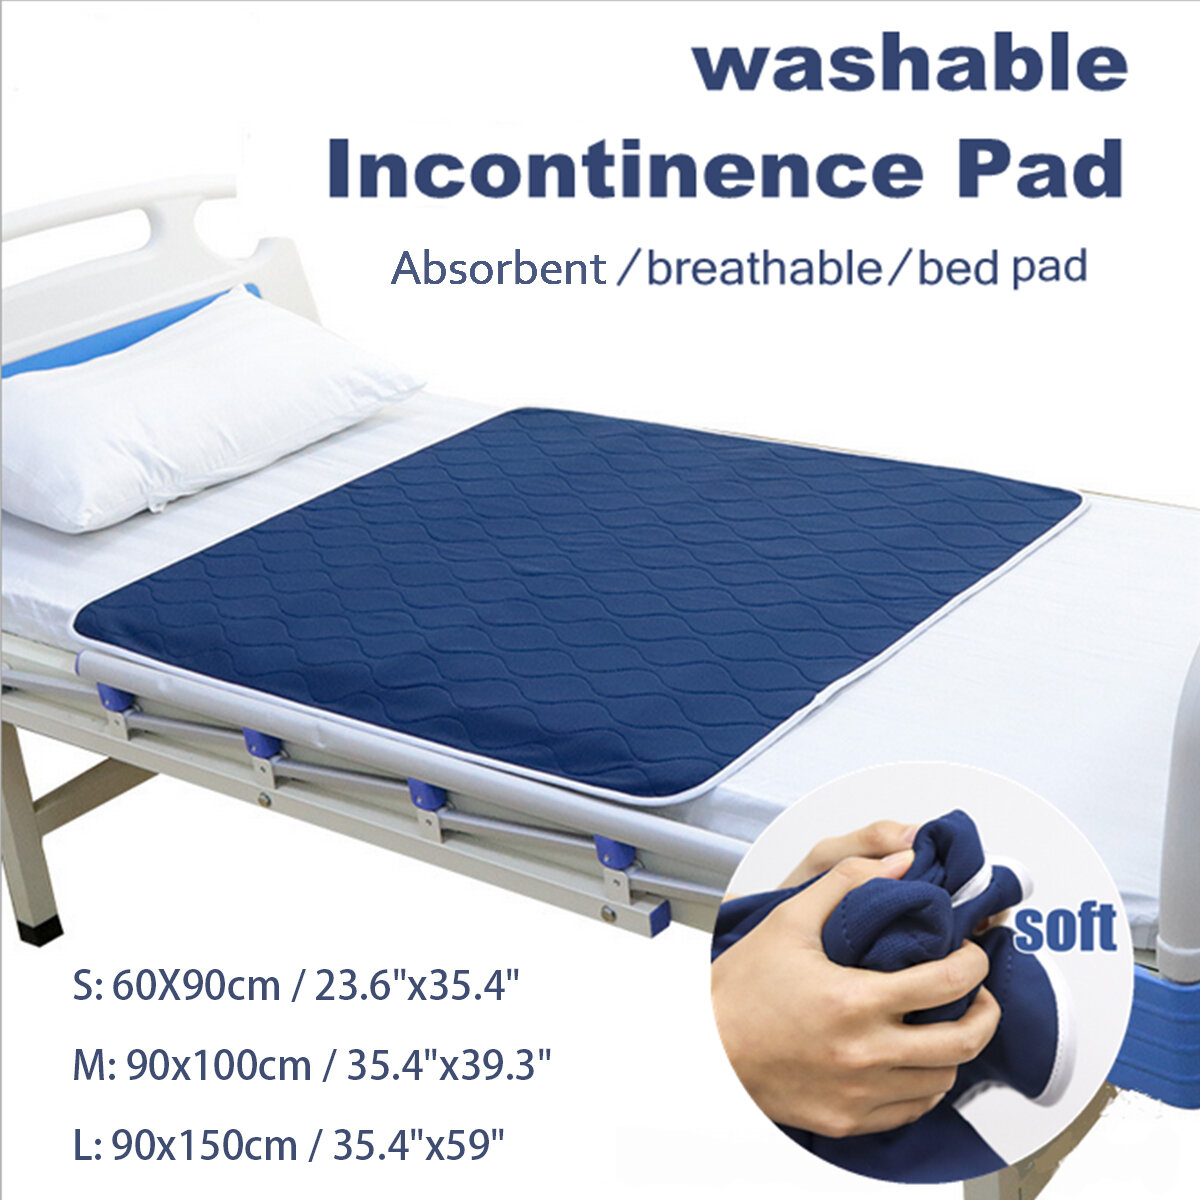 3 Sizes Underpad Washable Absorbent Bed Pad Incontinence Reusable Mattress Protector Underpad Washab